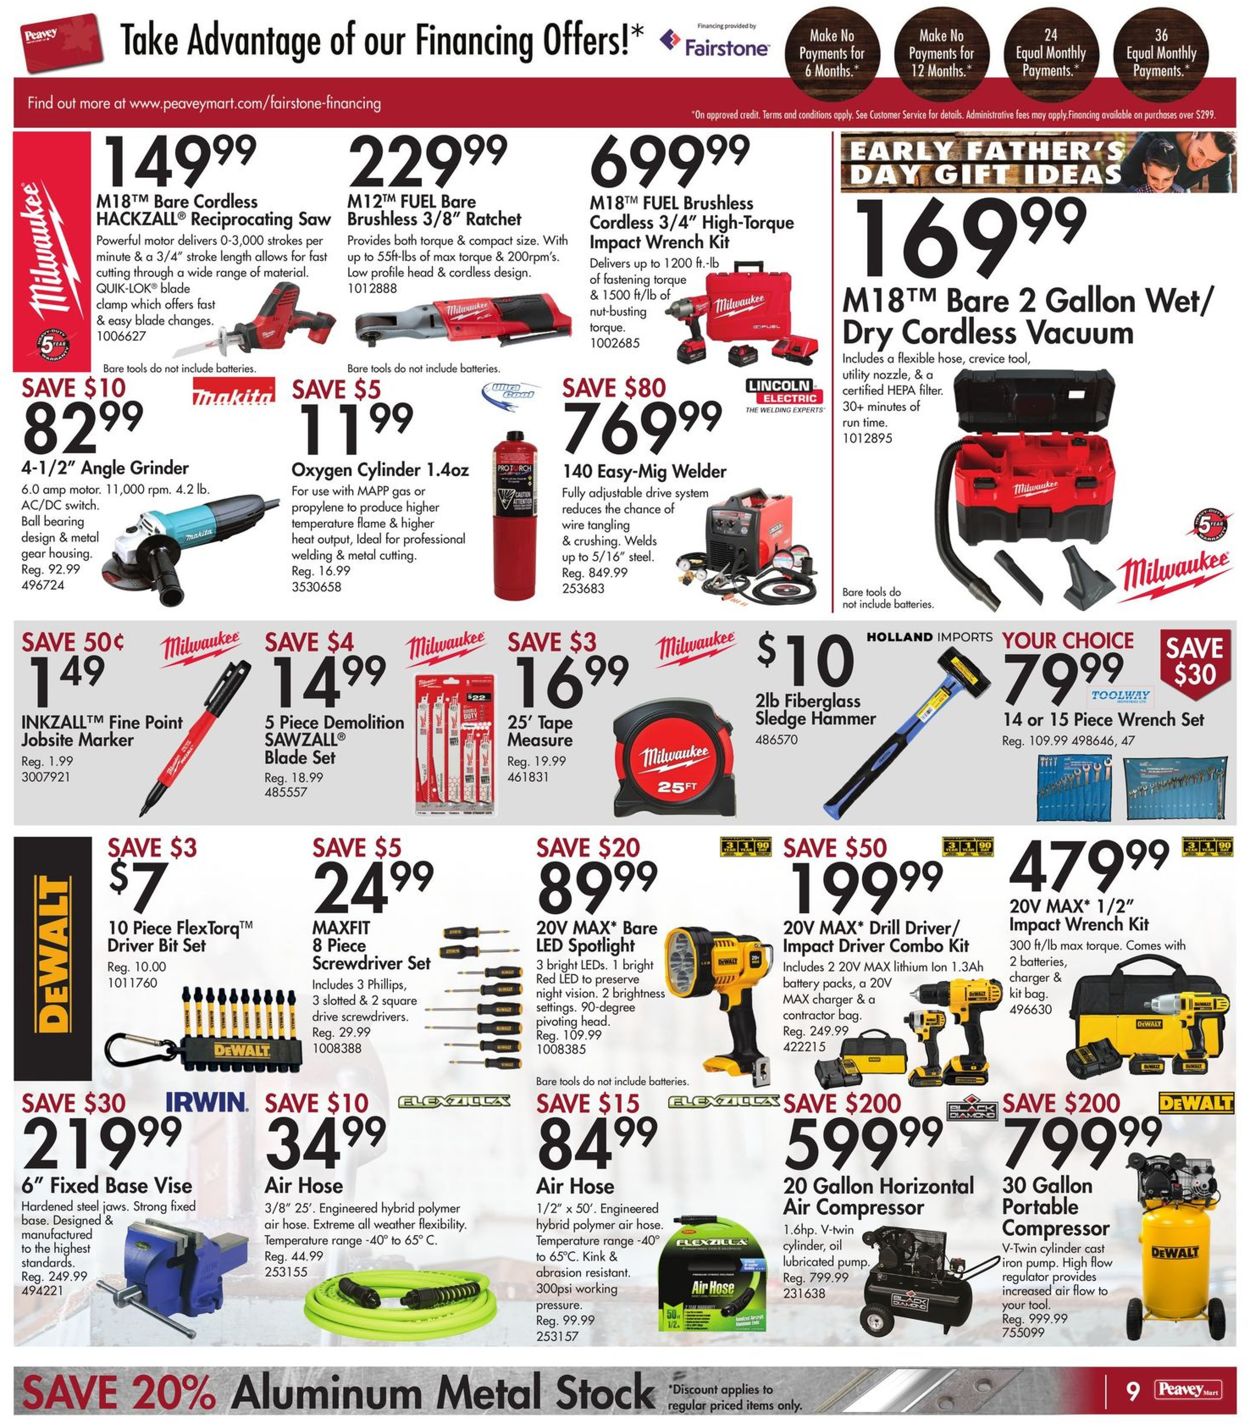 Peavey Mart Flyer from 06/10/2022